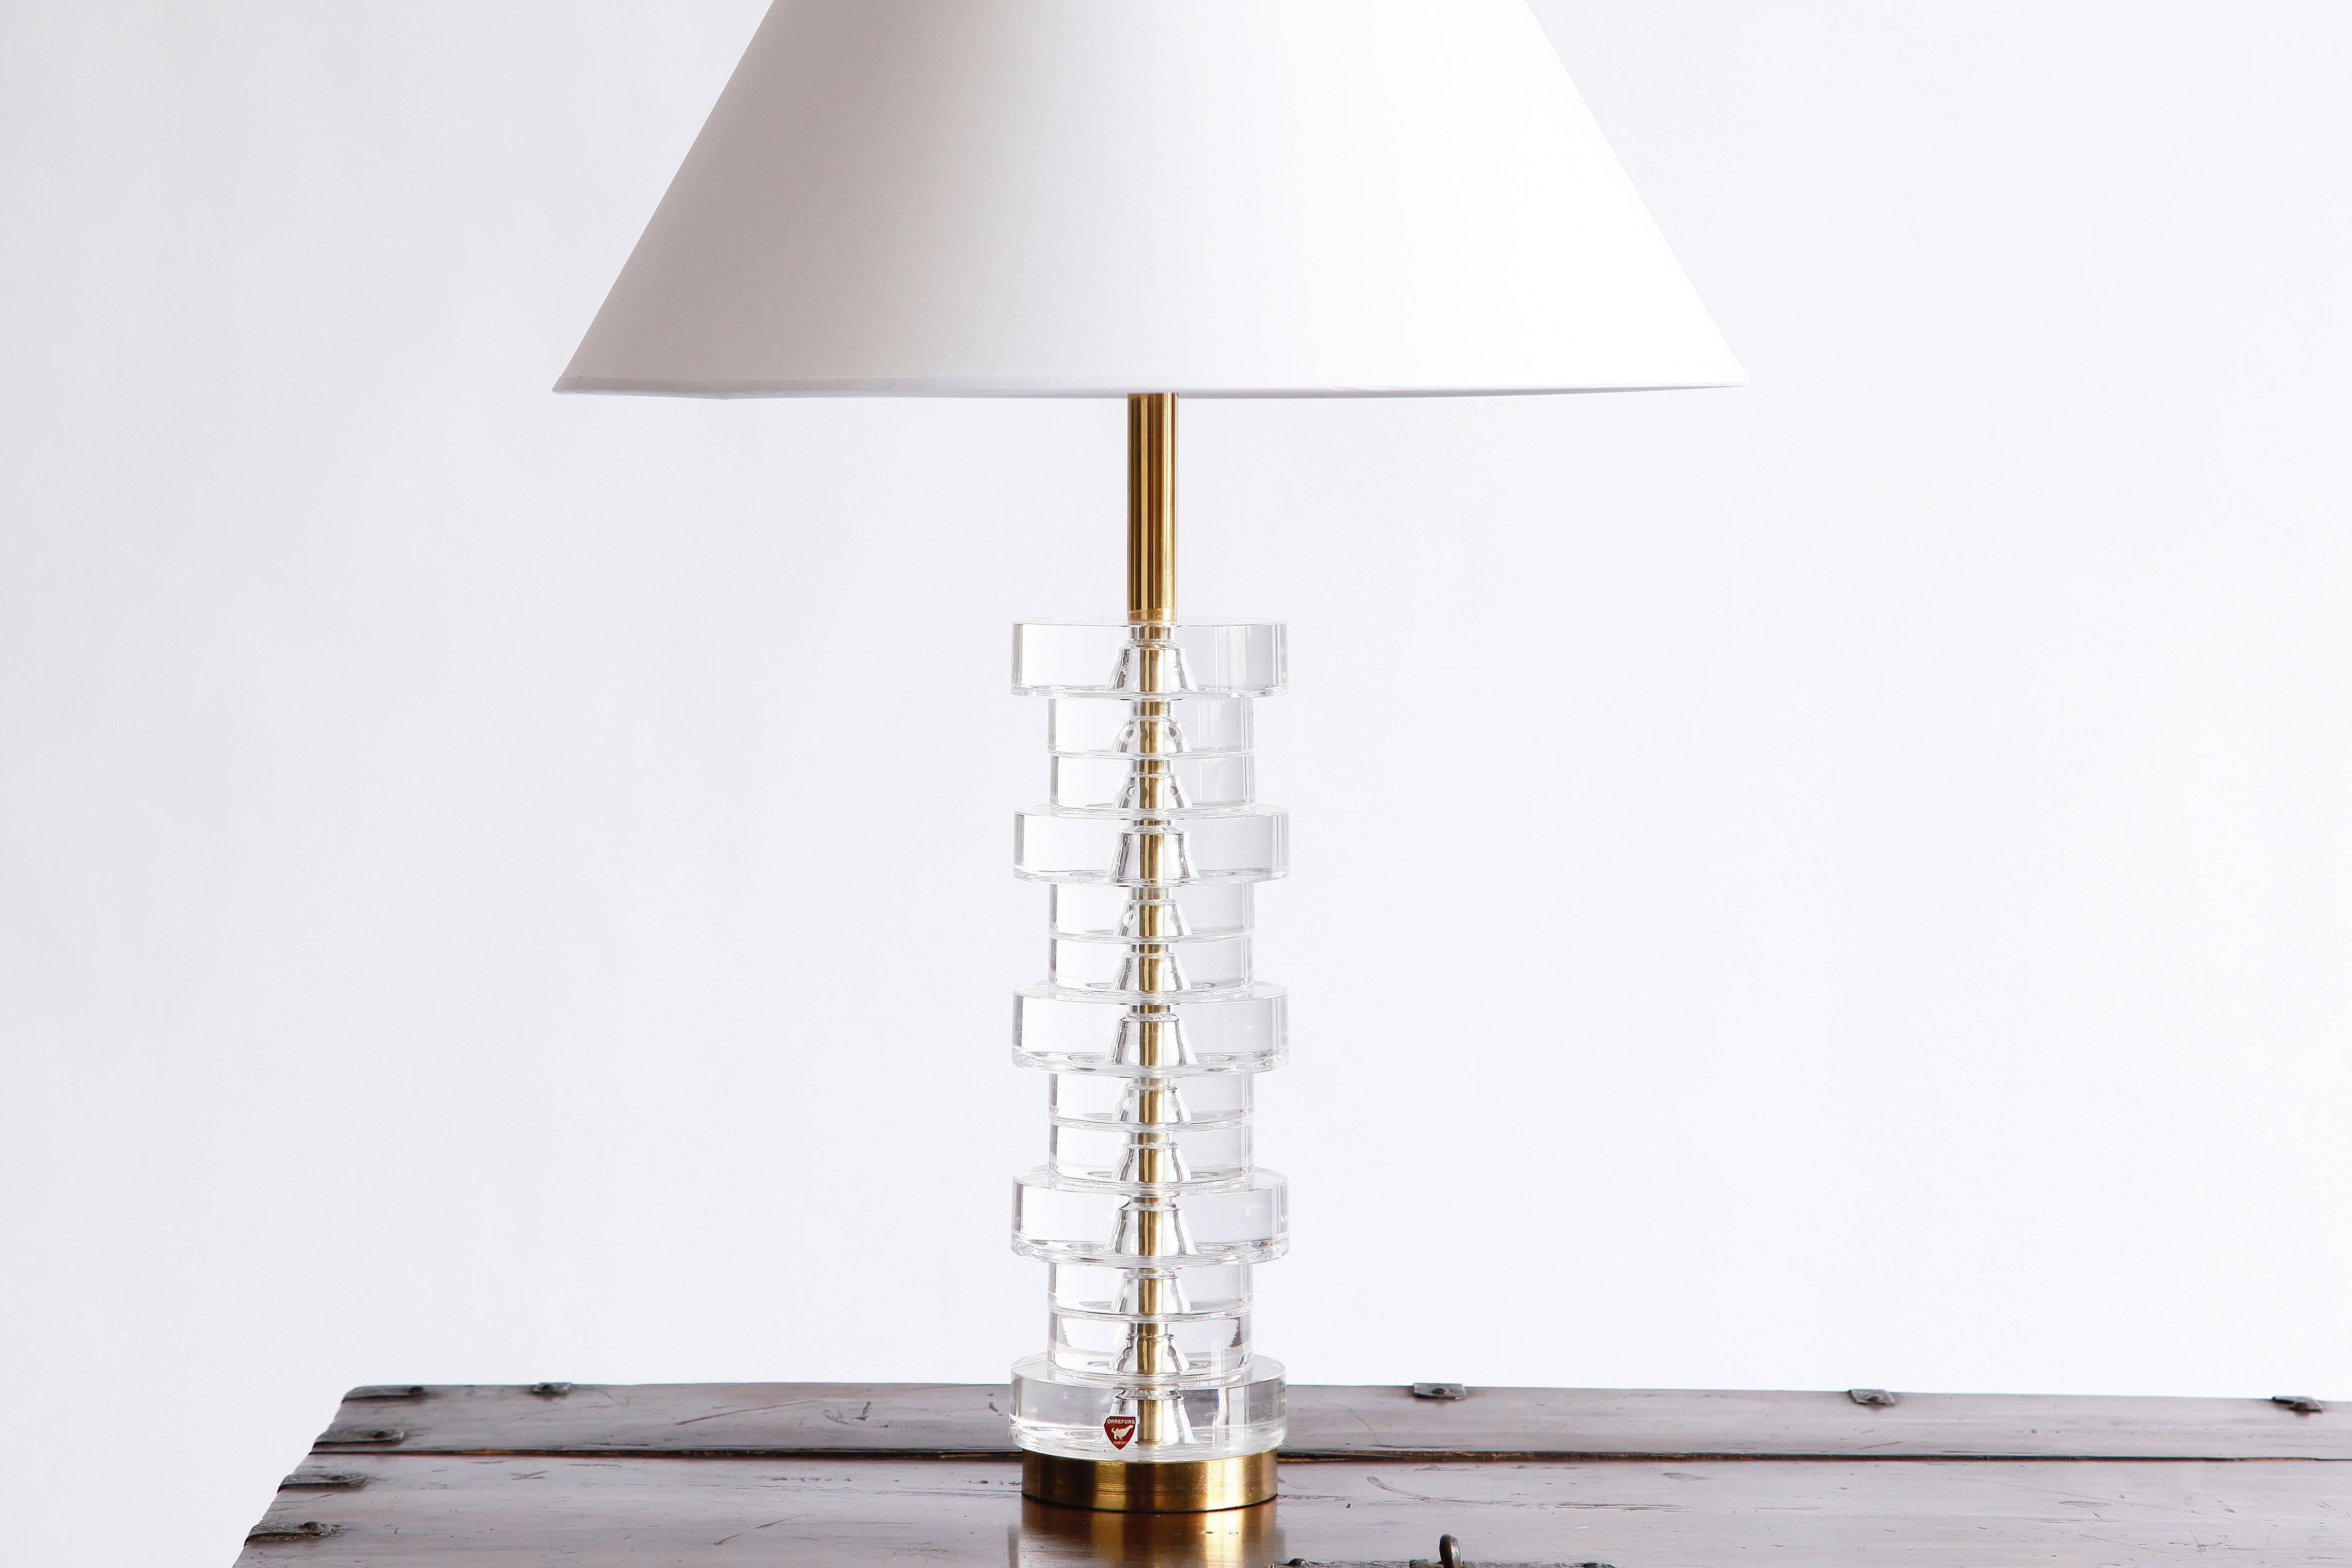 We have a weakness for the lamps Carl Fagerlund designed for Orrefors. They are simple and modern, but the quality speaks volumes, and the profile is timeless.